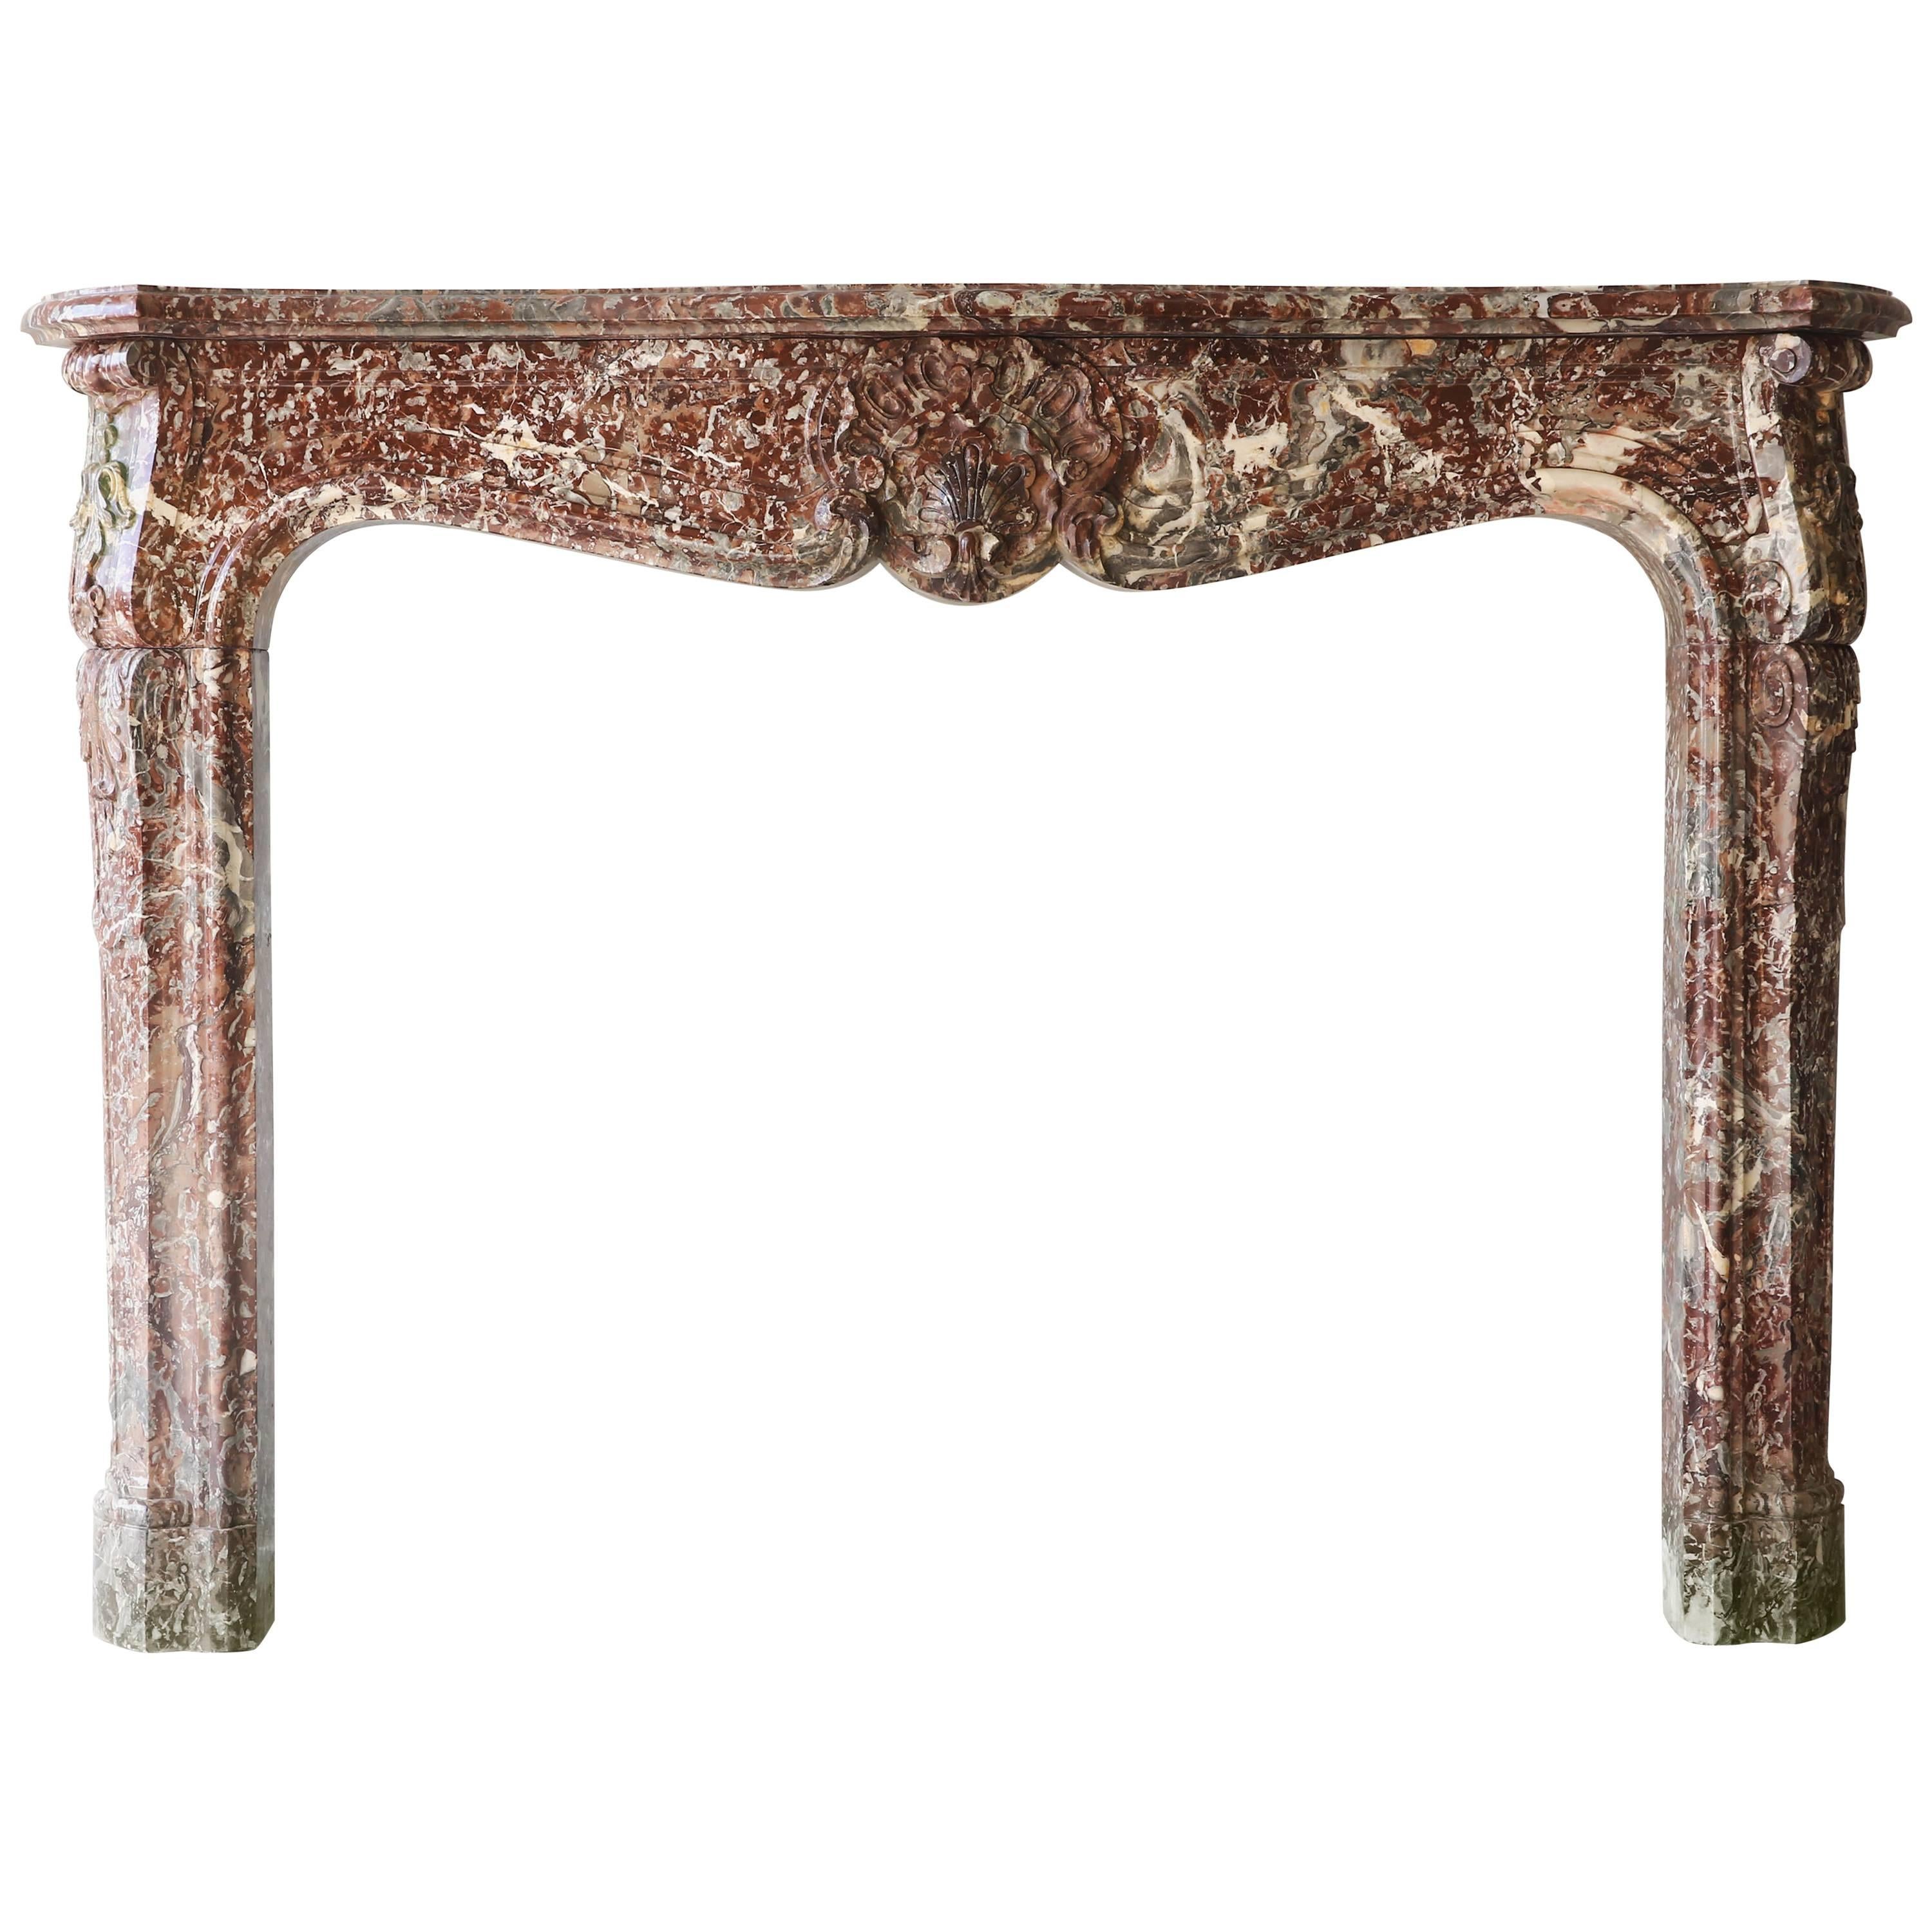 Antique Marble Fireplace, 18th Century, Style of Louis XV